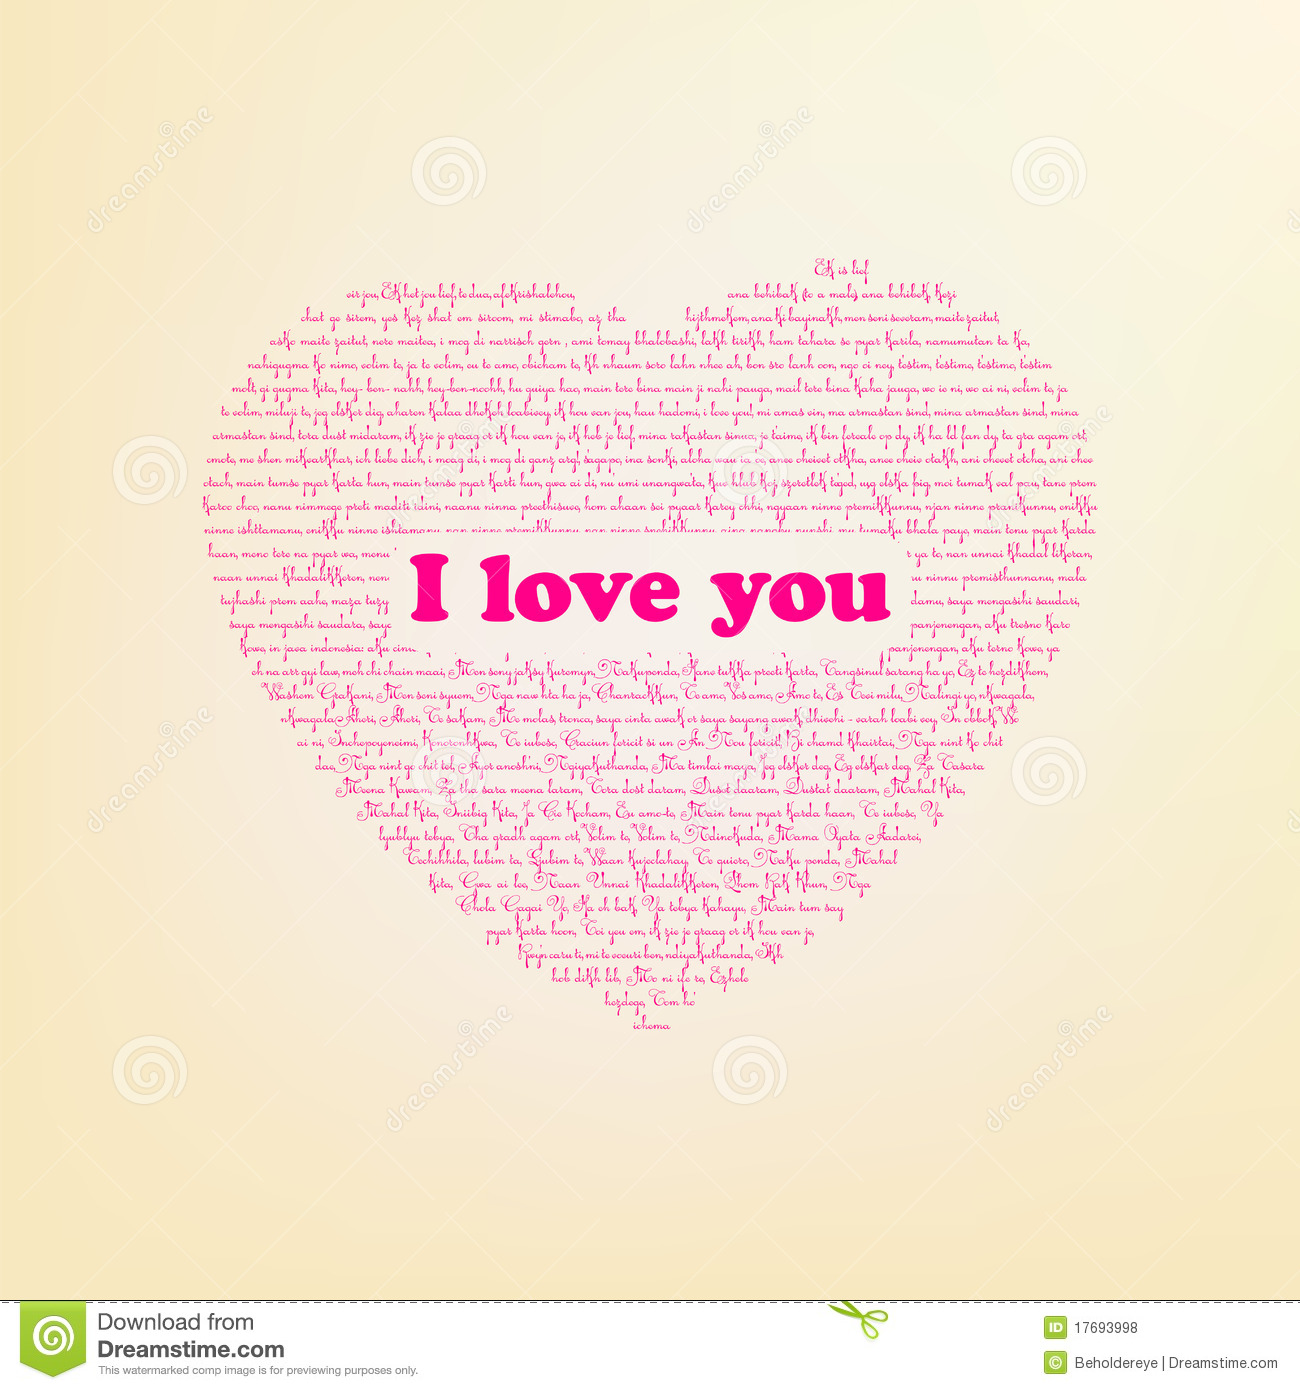 Love You In Different Languages  Eps 8 Royalty Free Stock Photos    